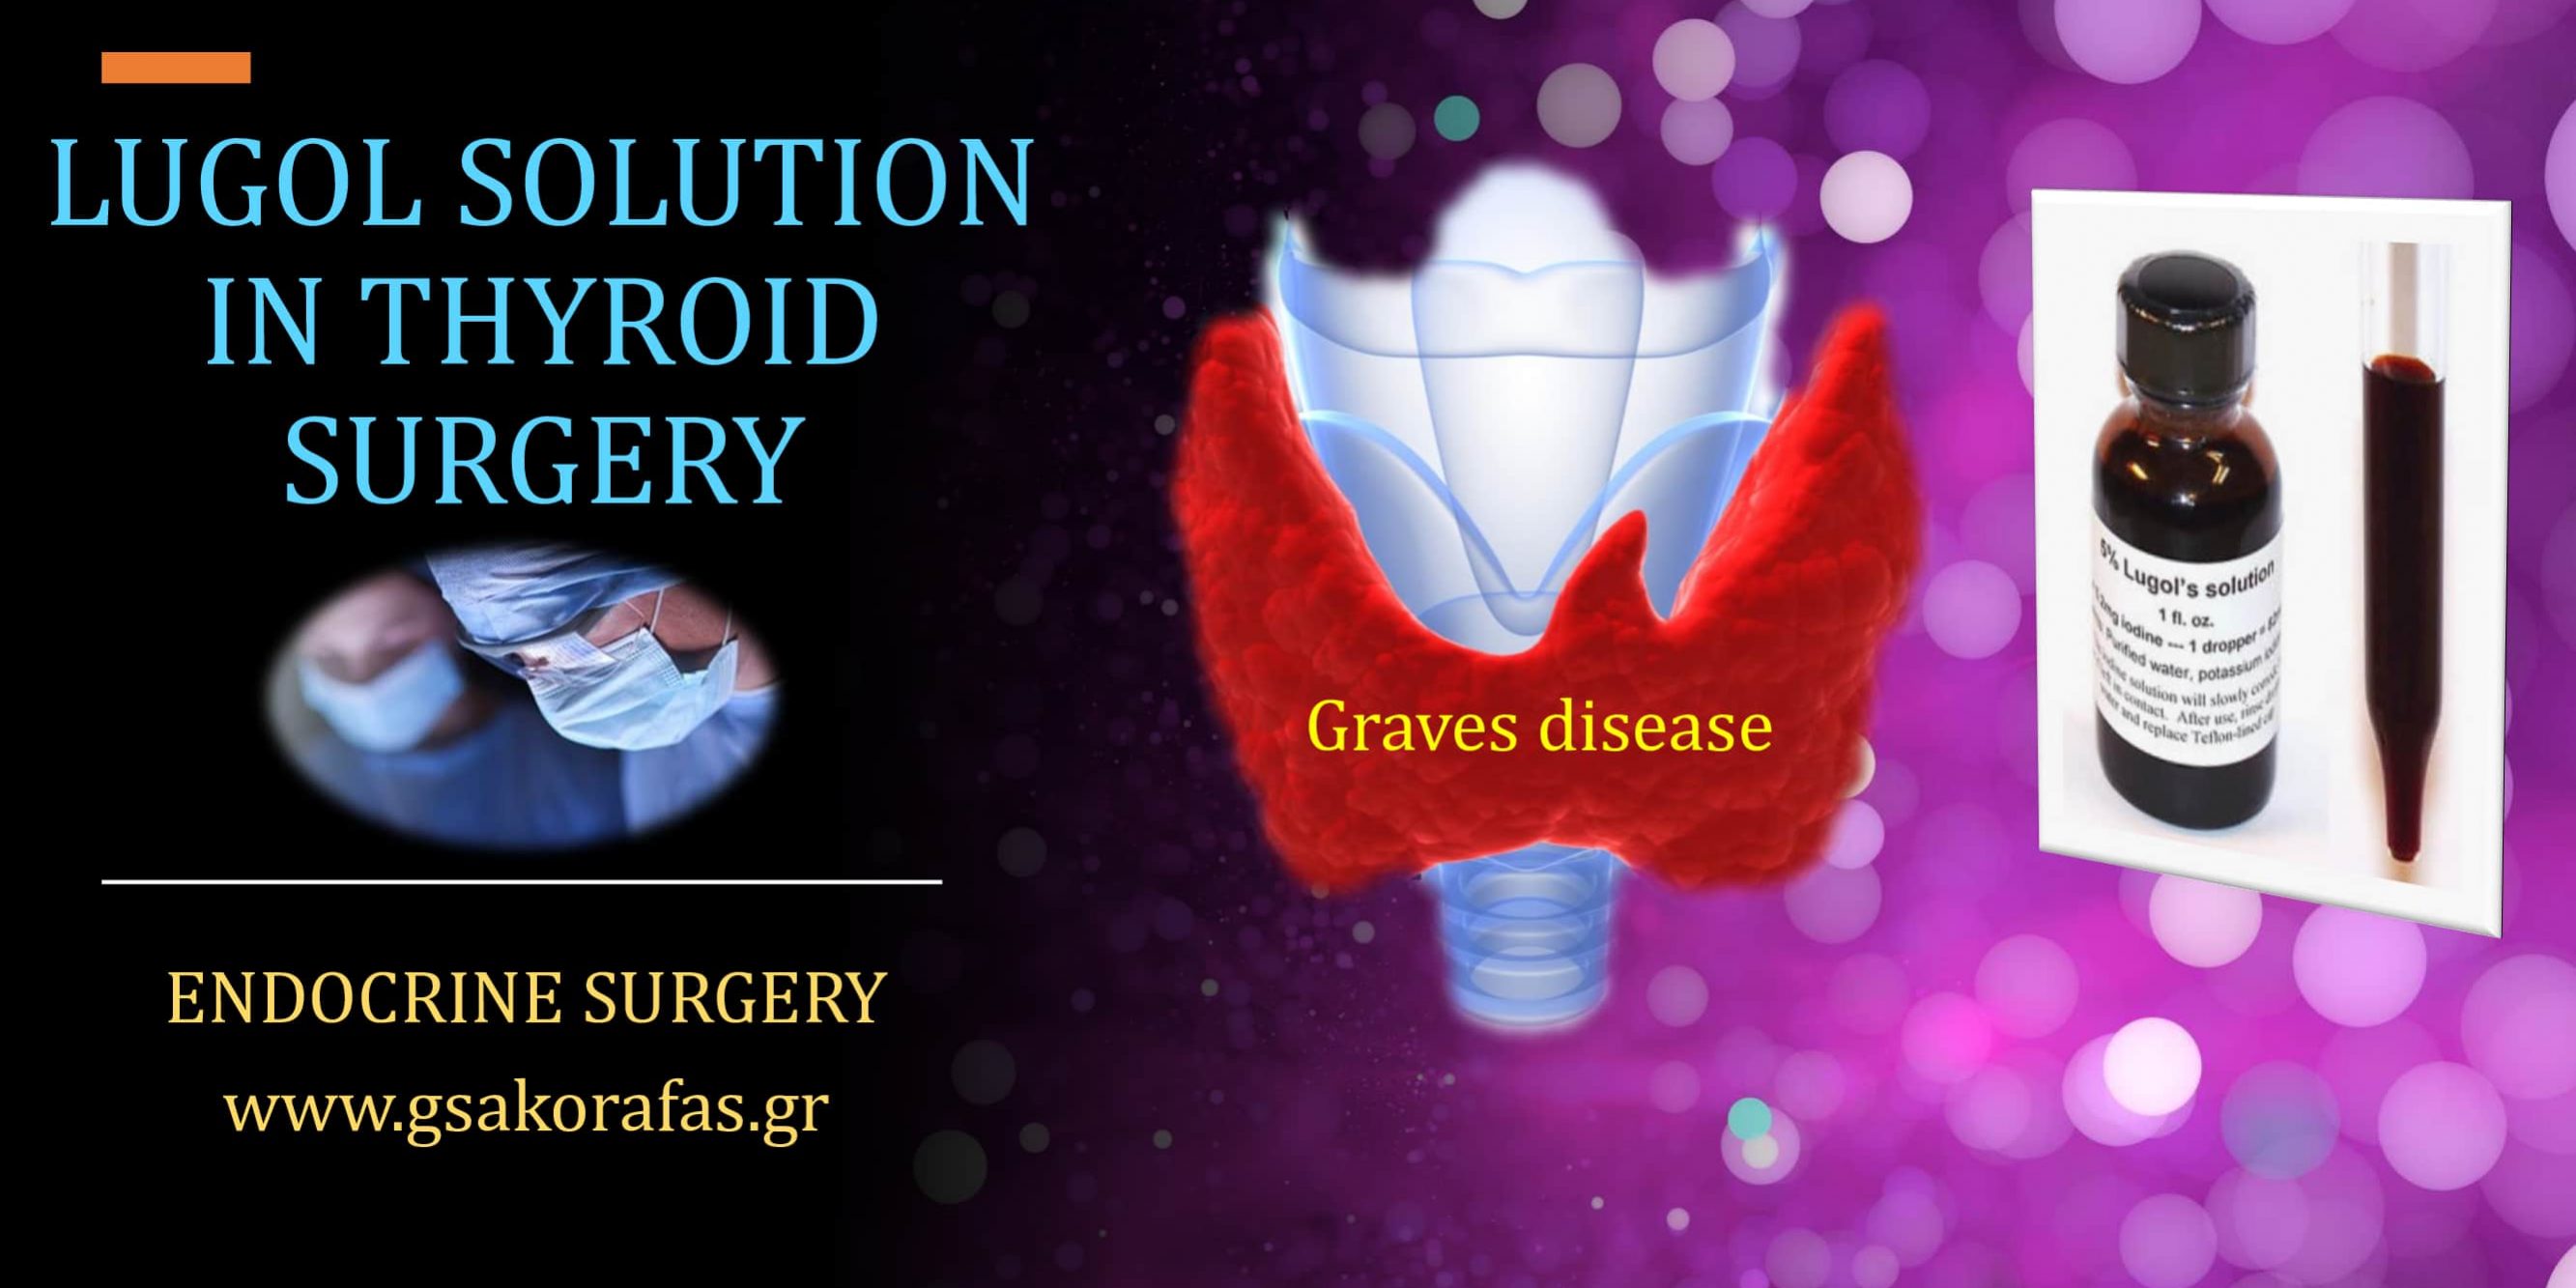 Lugol solution in thyroid surgery